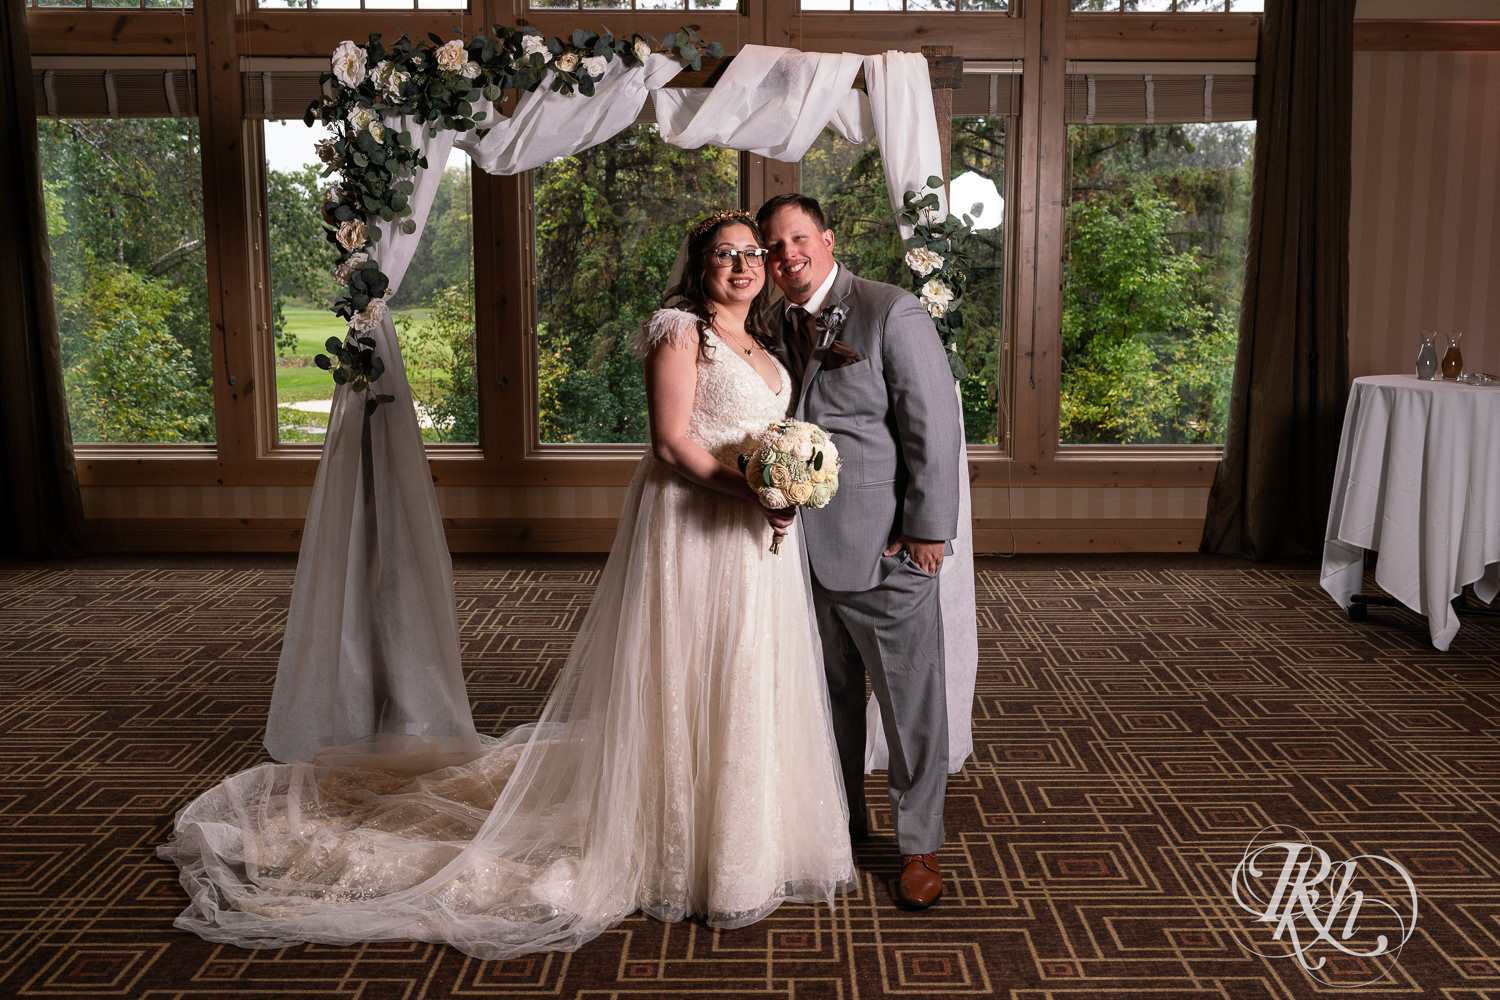 Bride and groom smile under arch on wedding day at Bunker Hills Event Center in Coon Rapids, Minnesota.